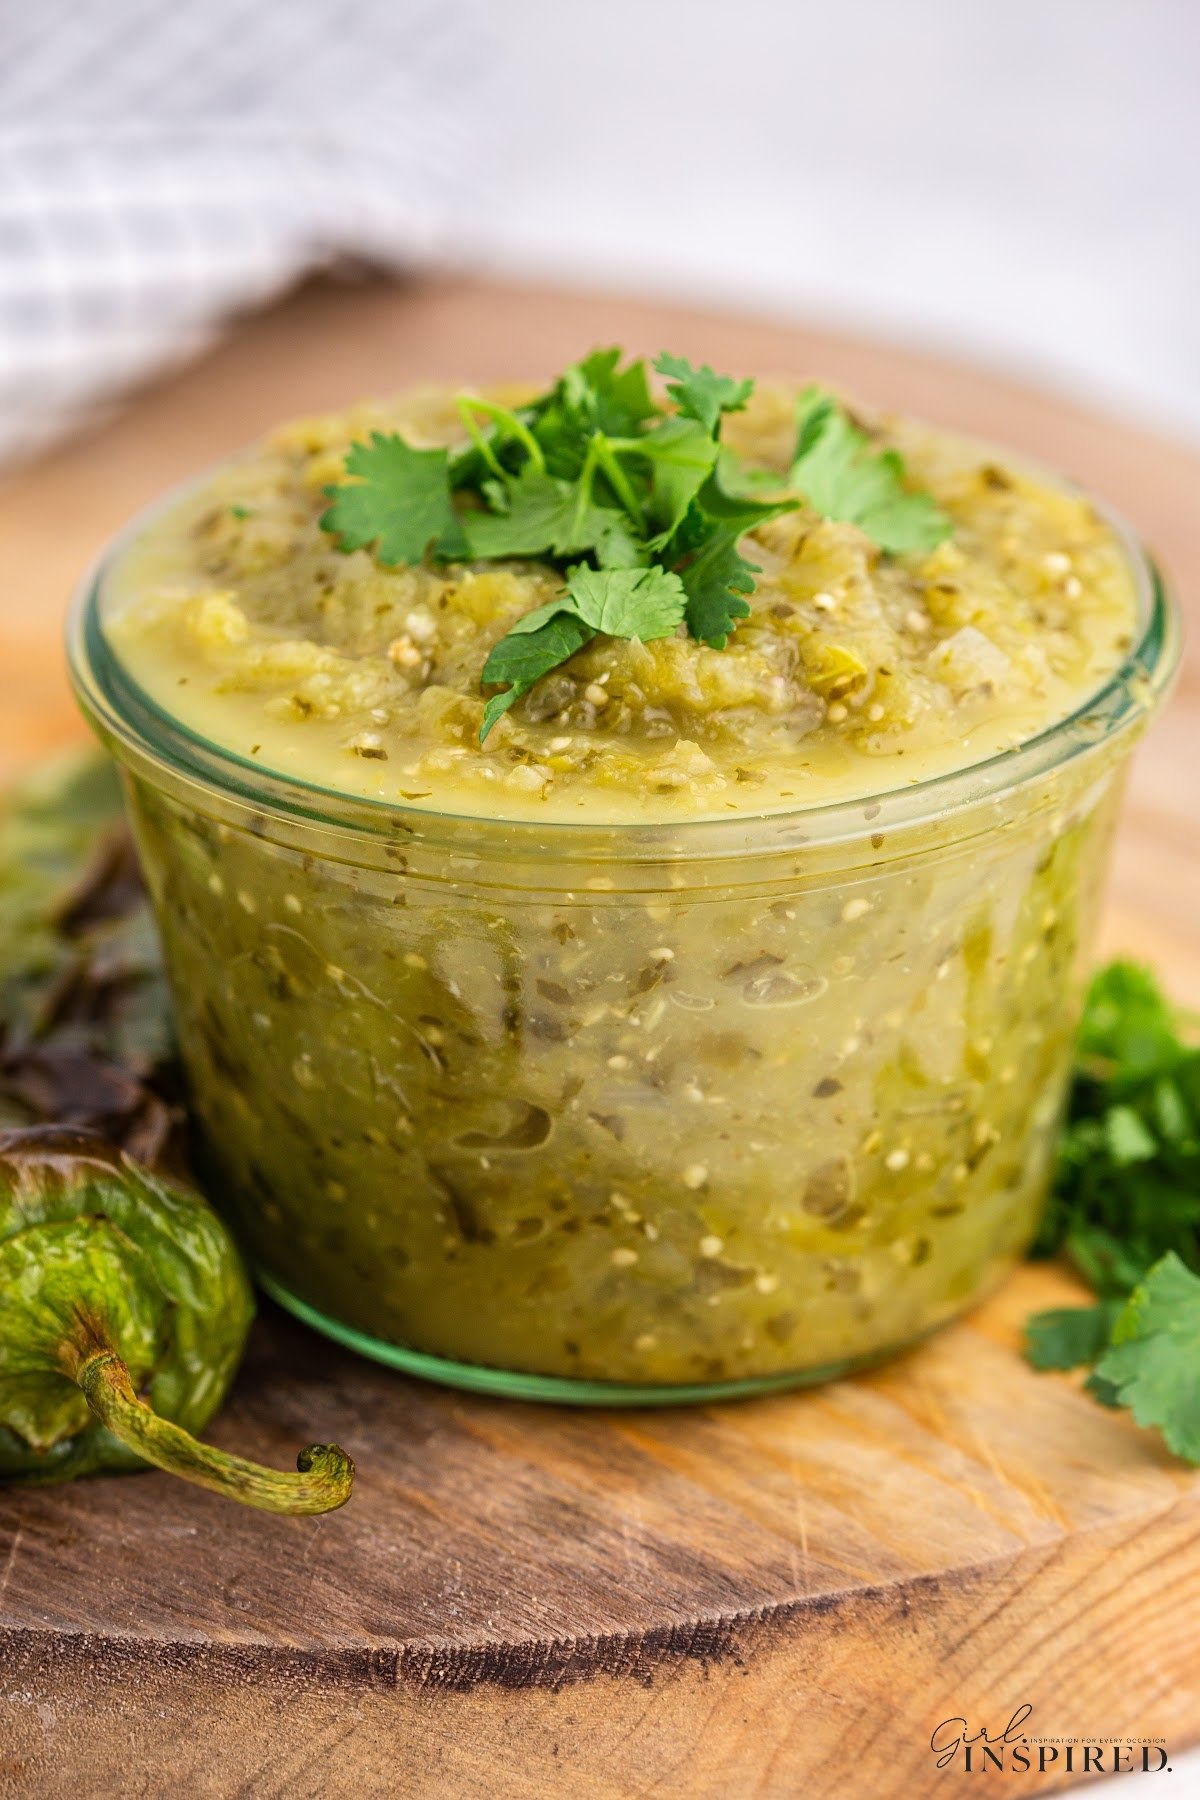 A small glass dish of Green Enchilada Sauce.